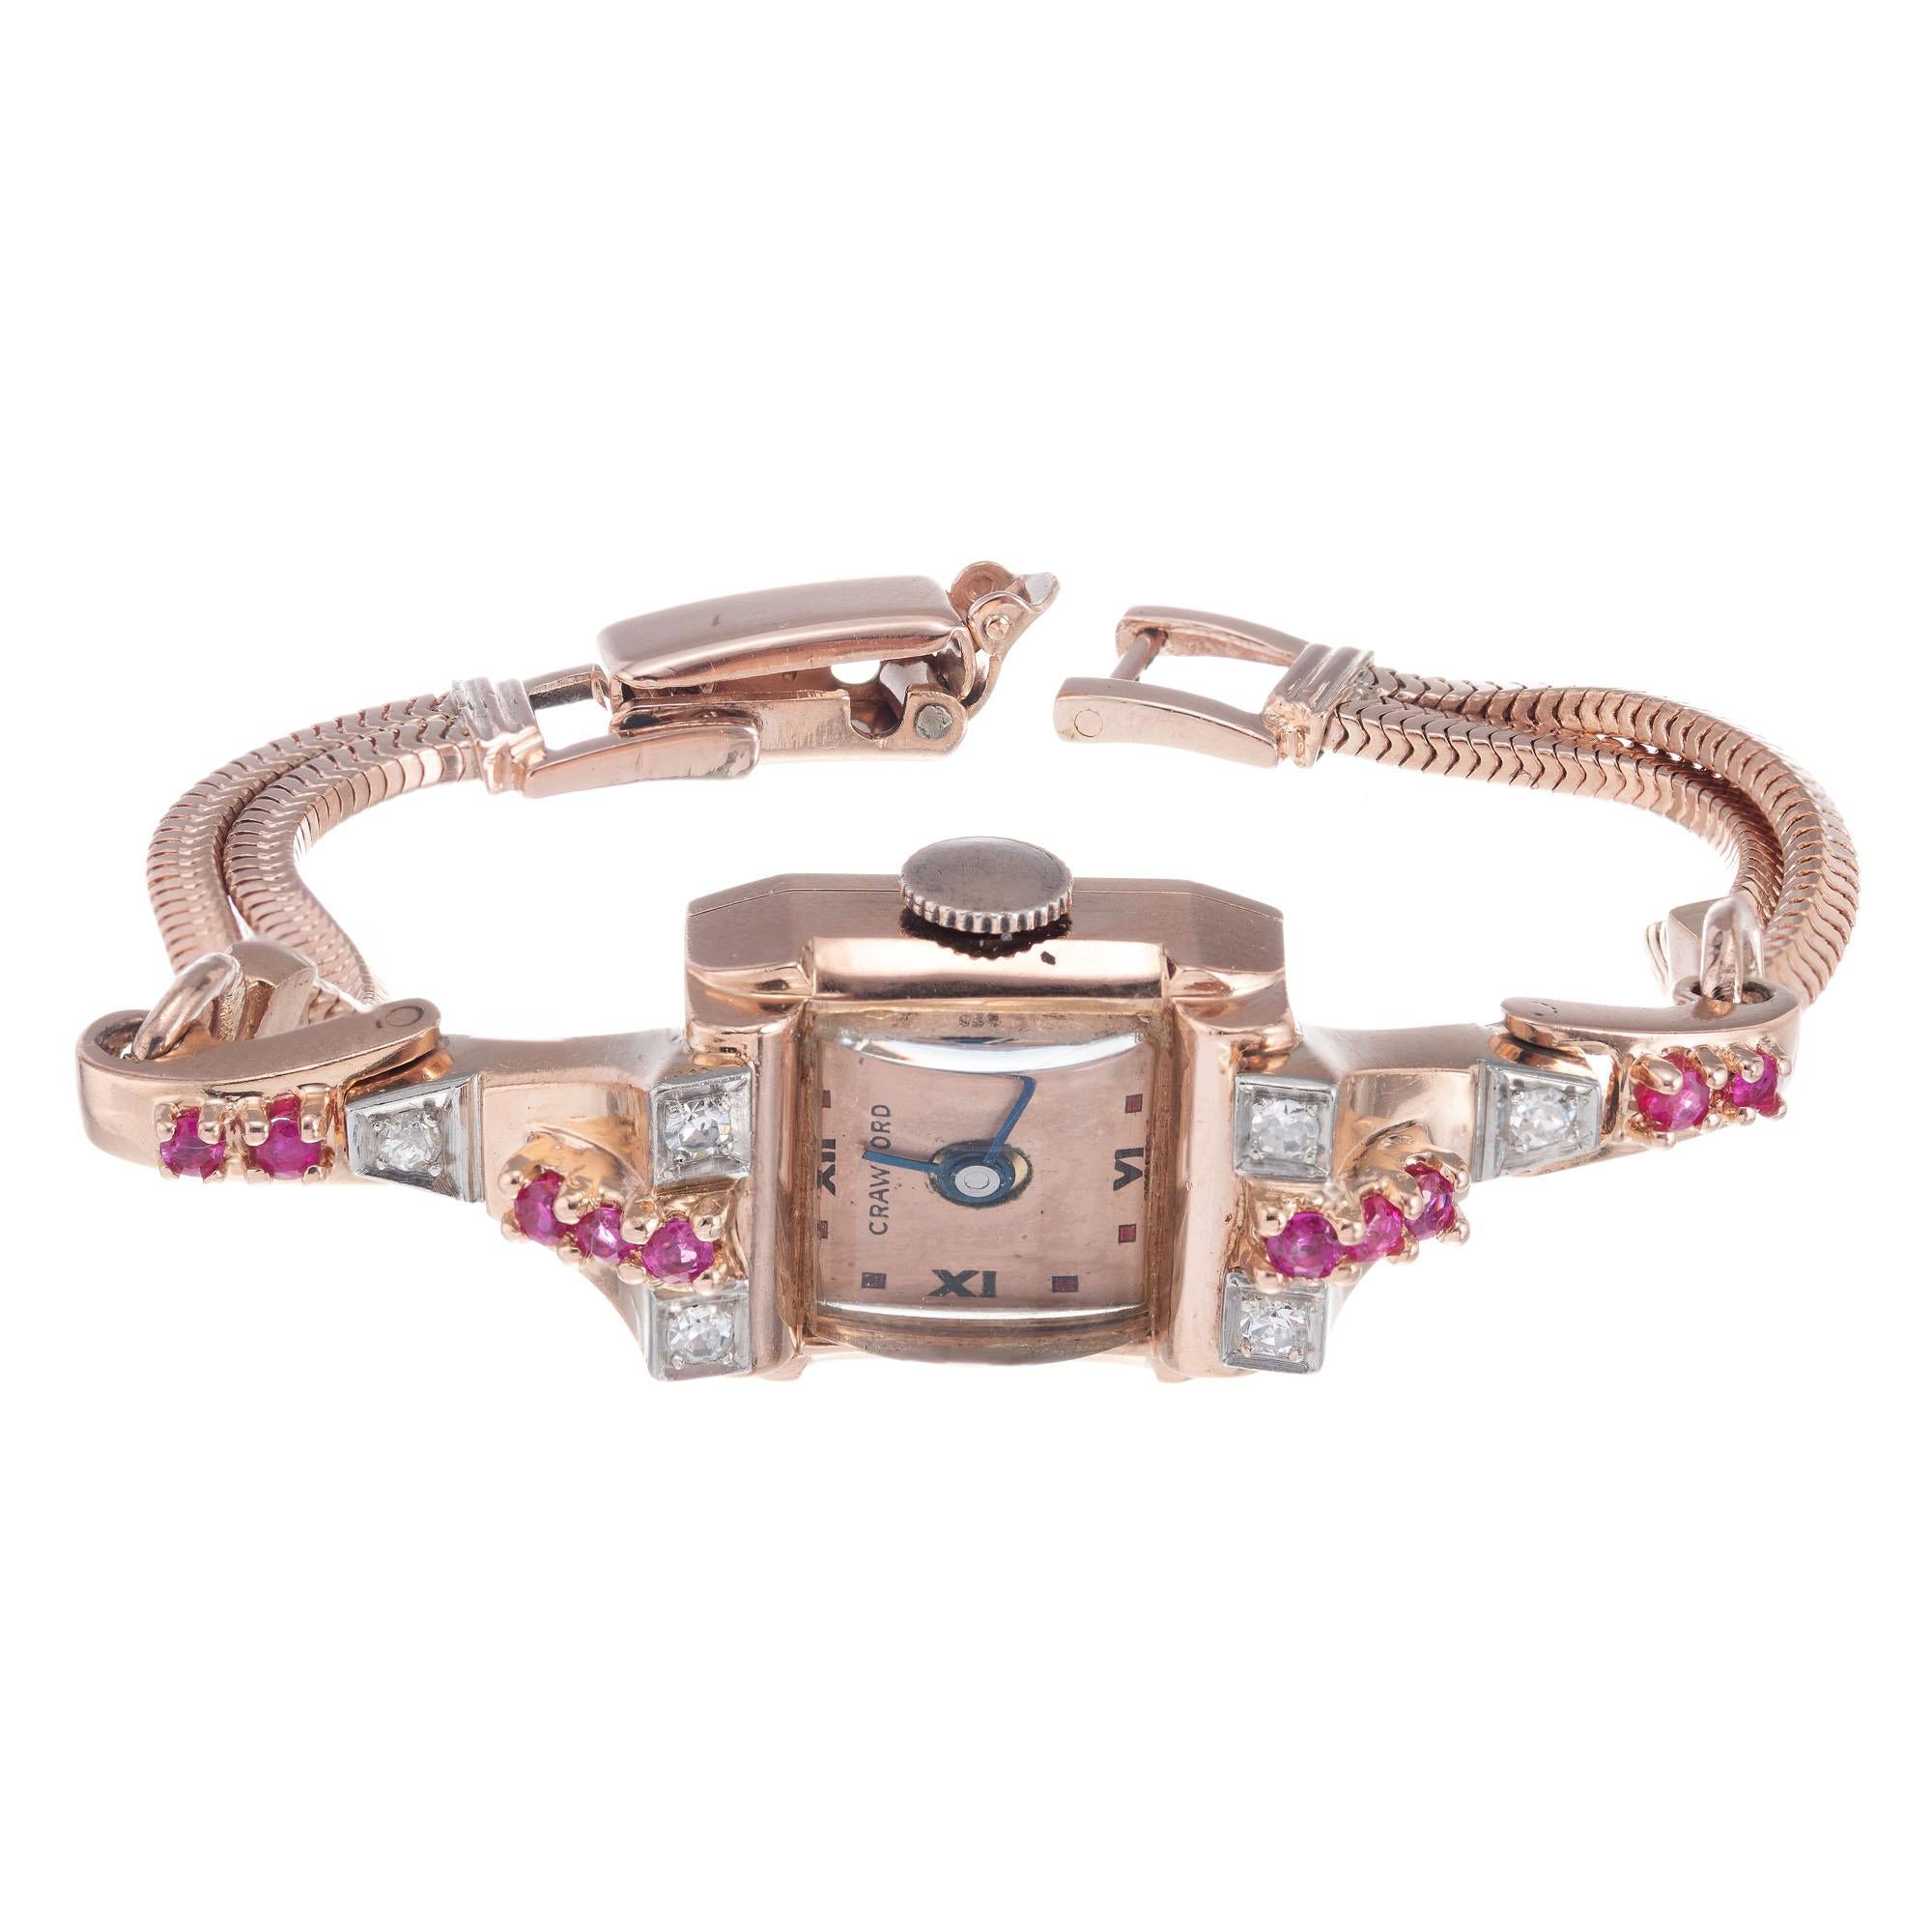 Vintage retro 1940’s Crawford 14k rose gold ruby and diamond wristwatch with rose gold double snake chain bracelet. 6.75 inches

6 round diamonds, approx. .12cts
10 genuine rubies, approx. .20cts
14k rose gold 
Length: 38.07mm
Width: 14.97mm
Case